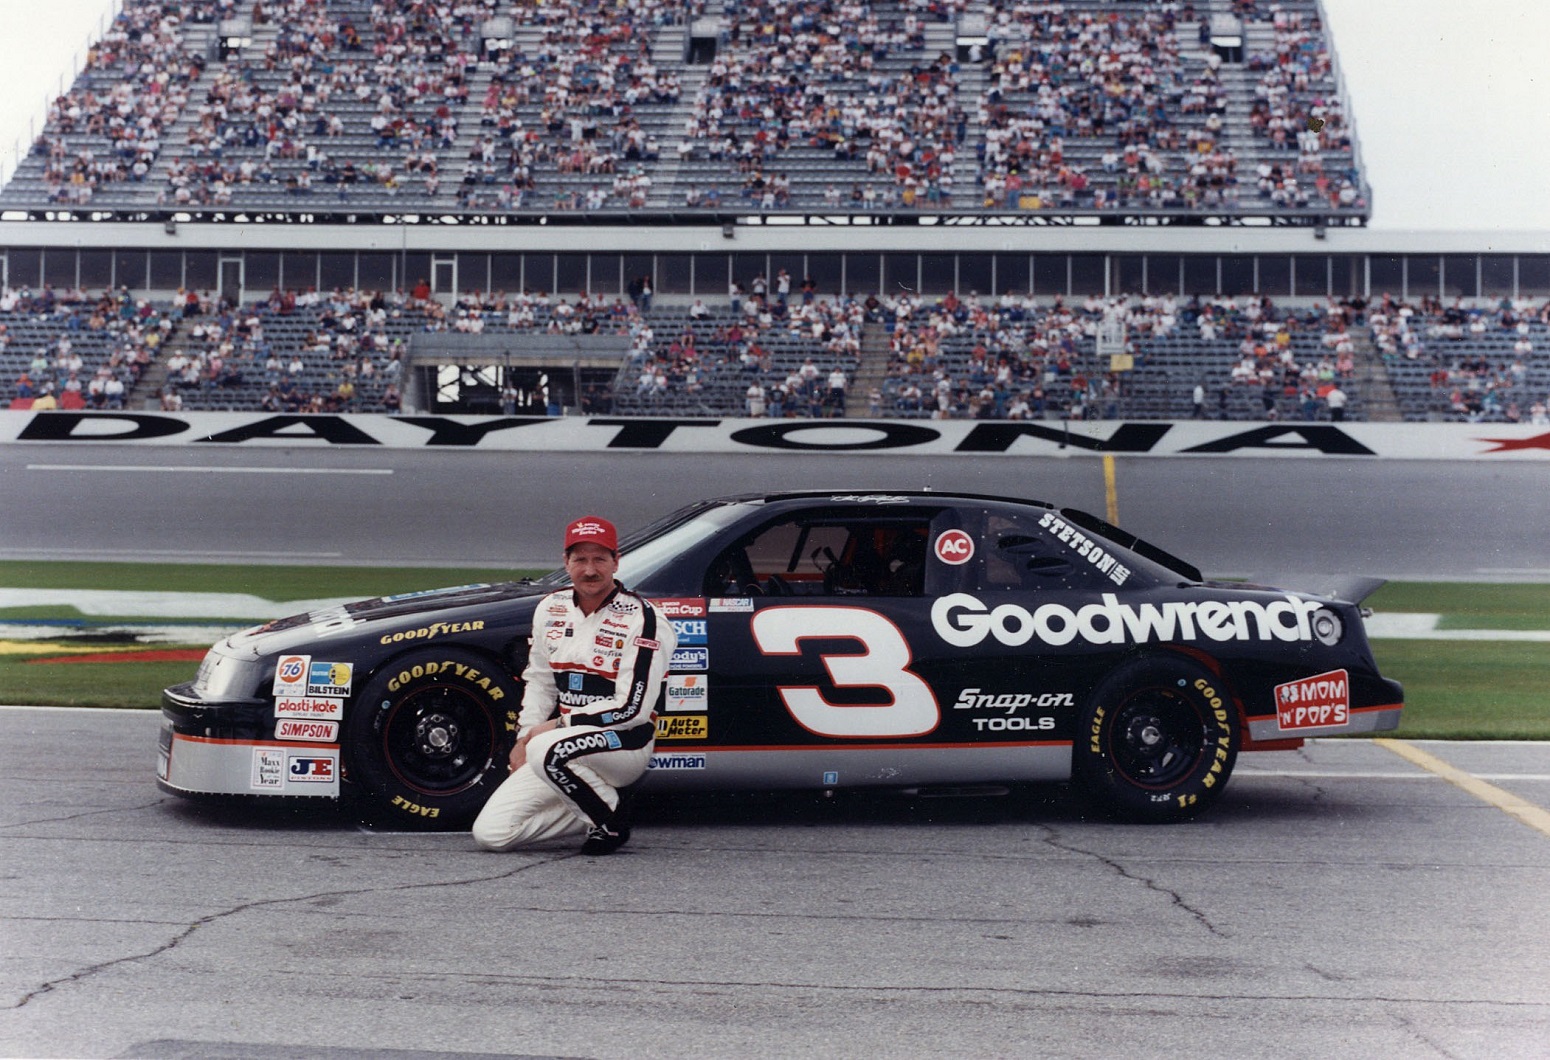 Dale Earnhardt Sr.’s Mom Hopes NASCAR Will Honor an Emotional Request She Made for Her Son